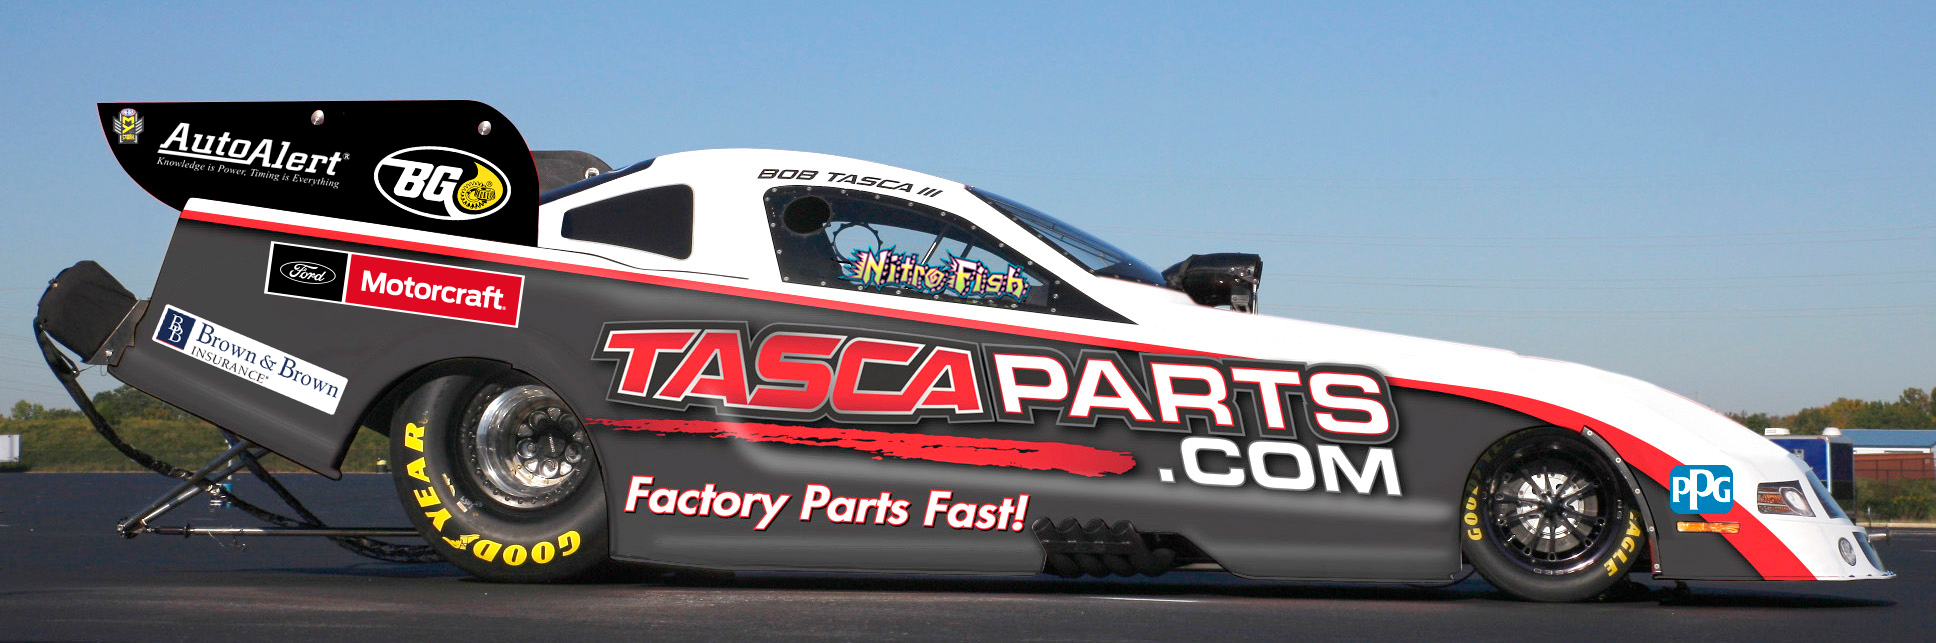 Ford tasca parts